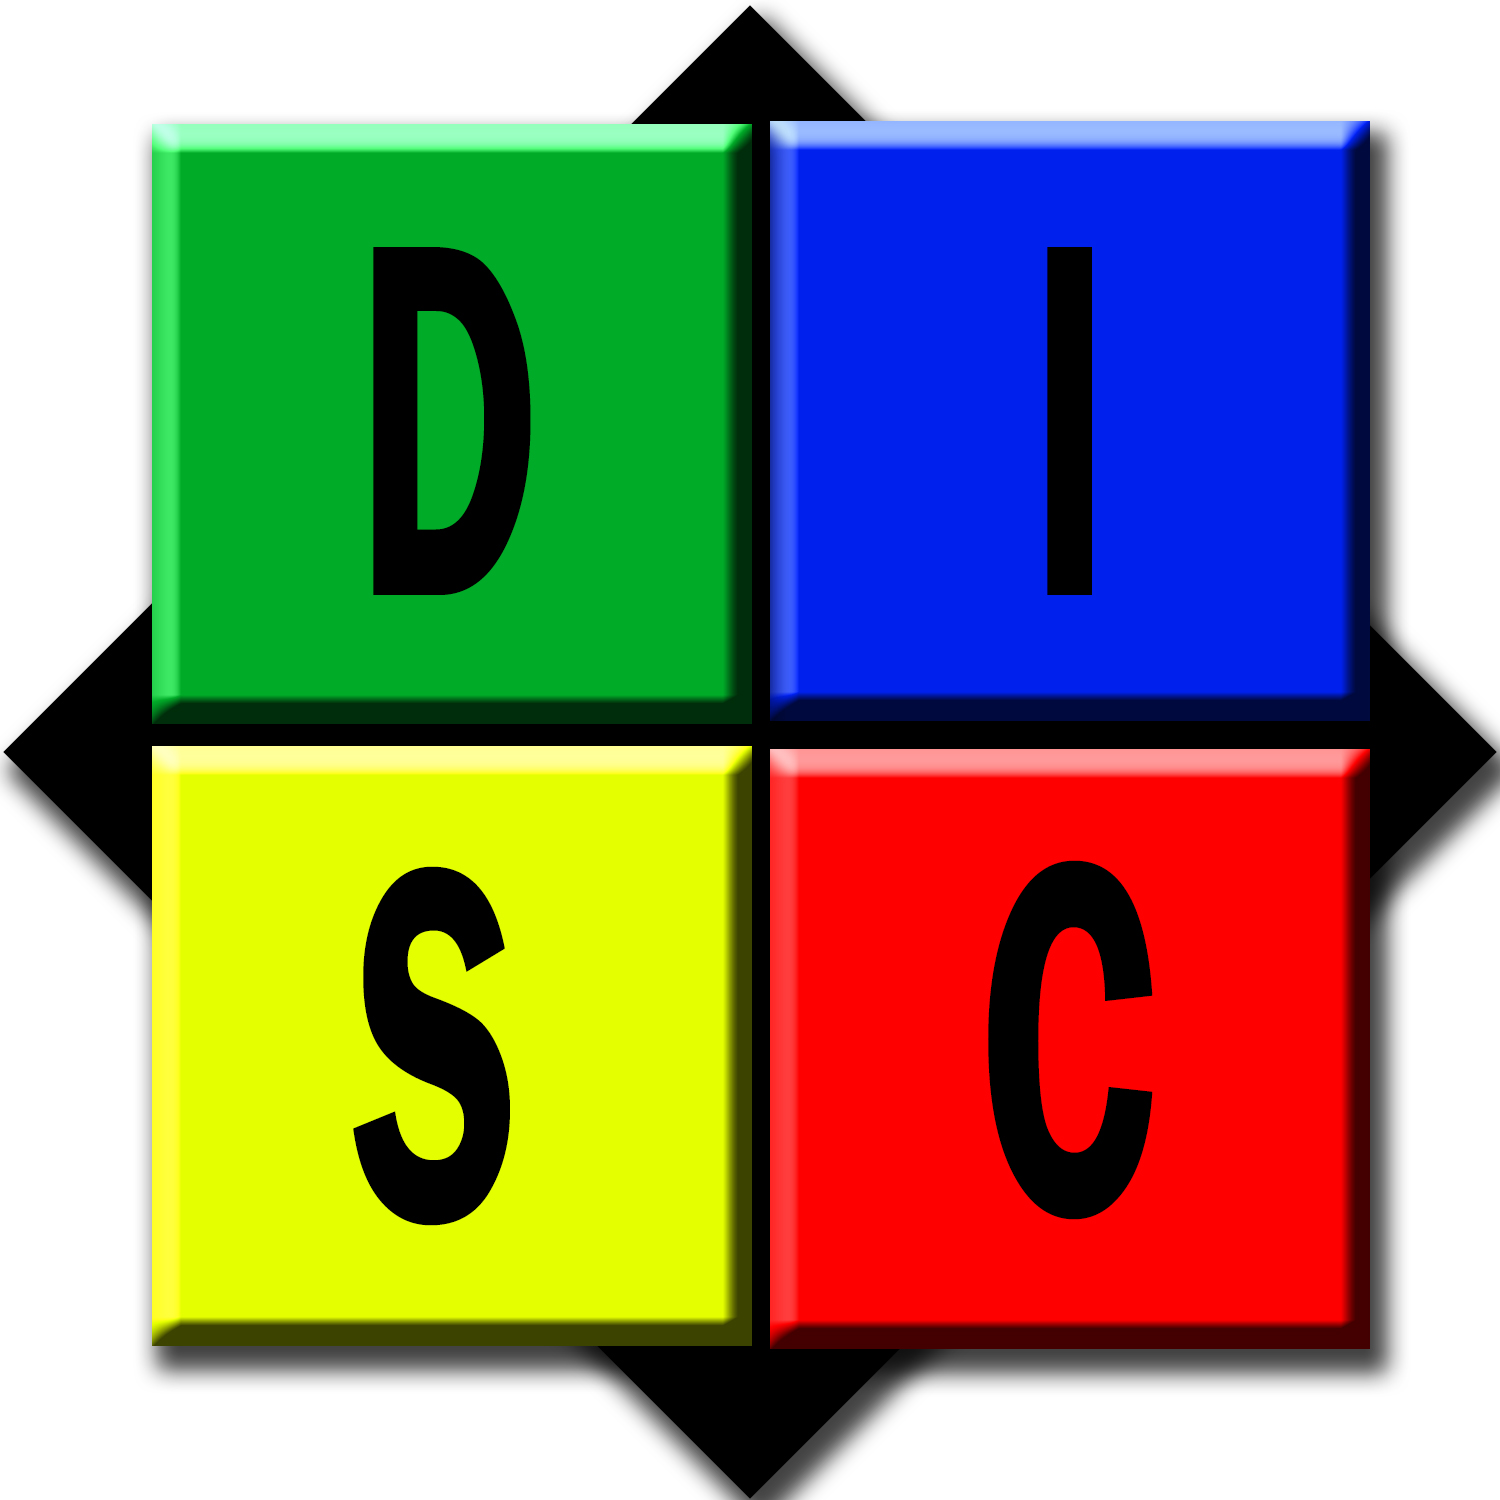 Disc Behavioral Test - learning instrument used for understanding behavioral types and personality styles.